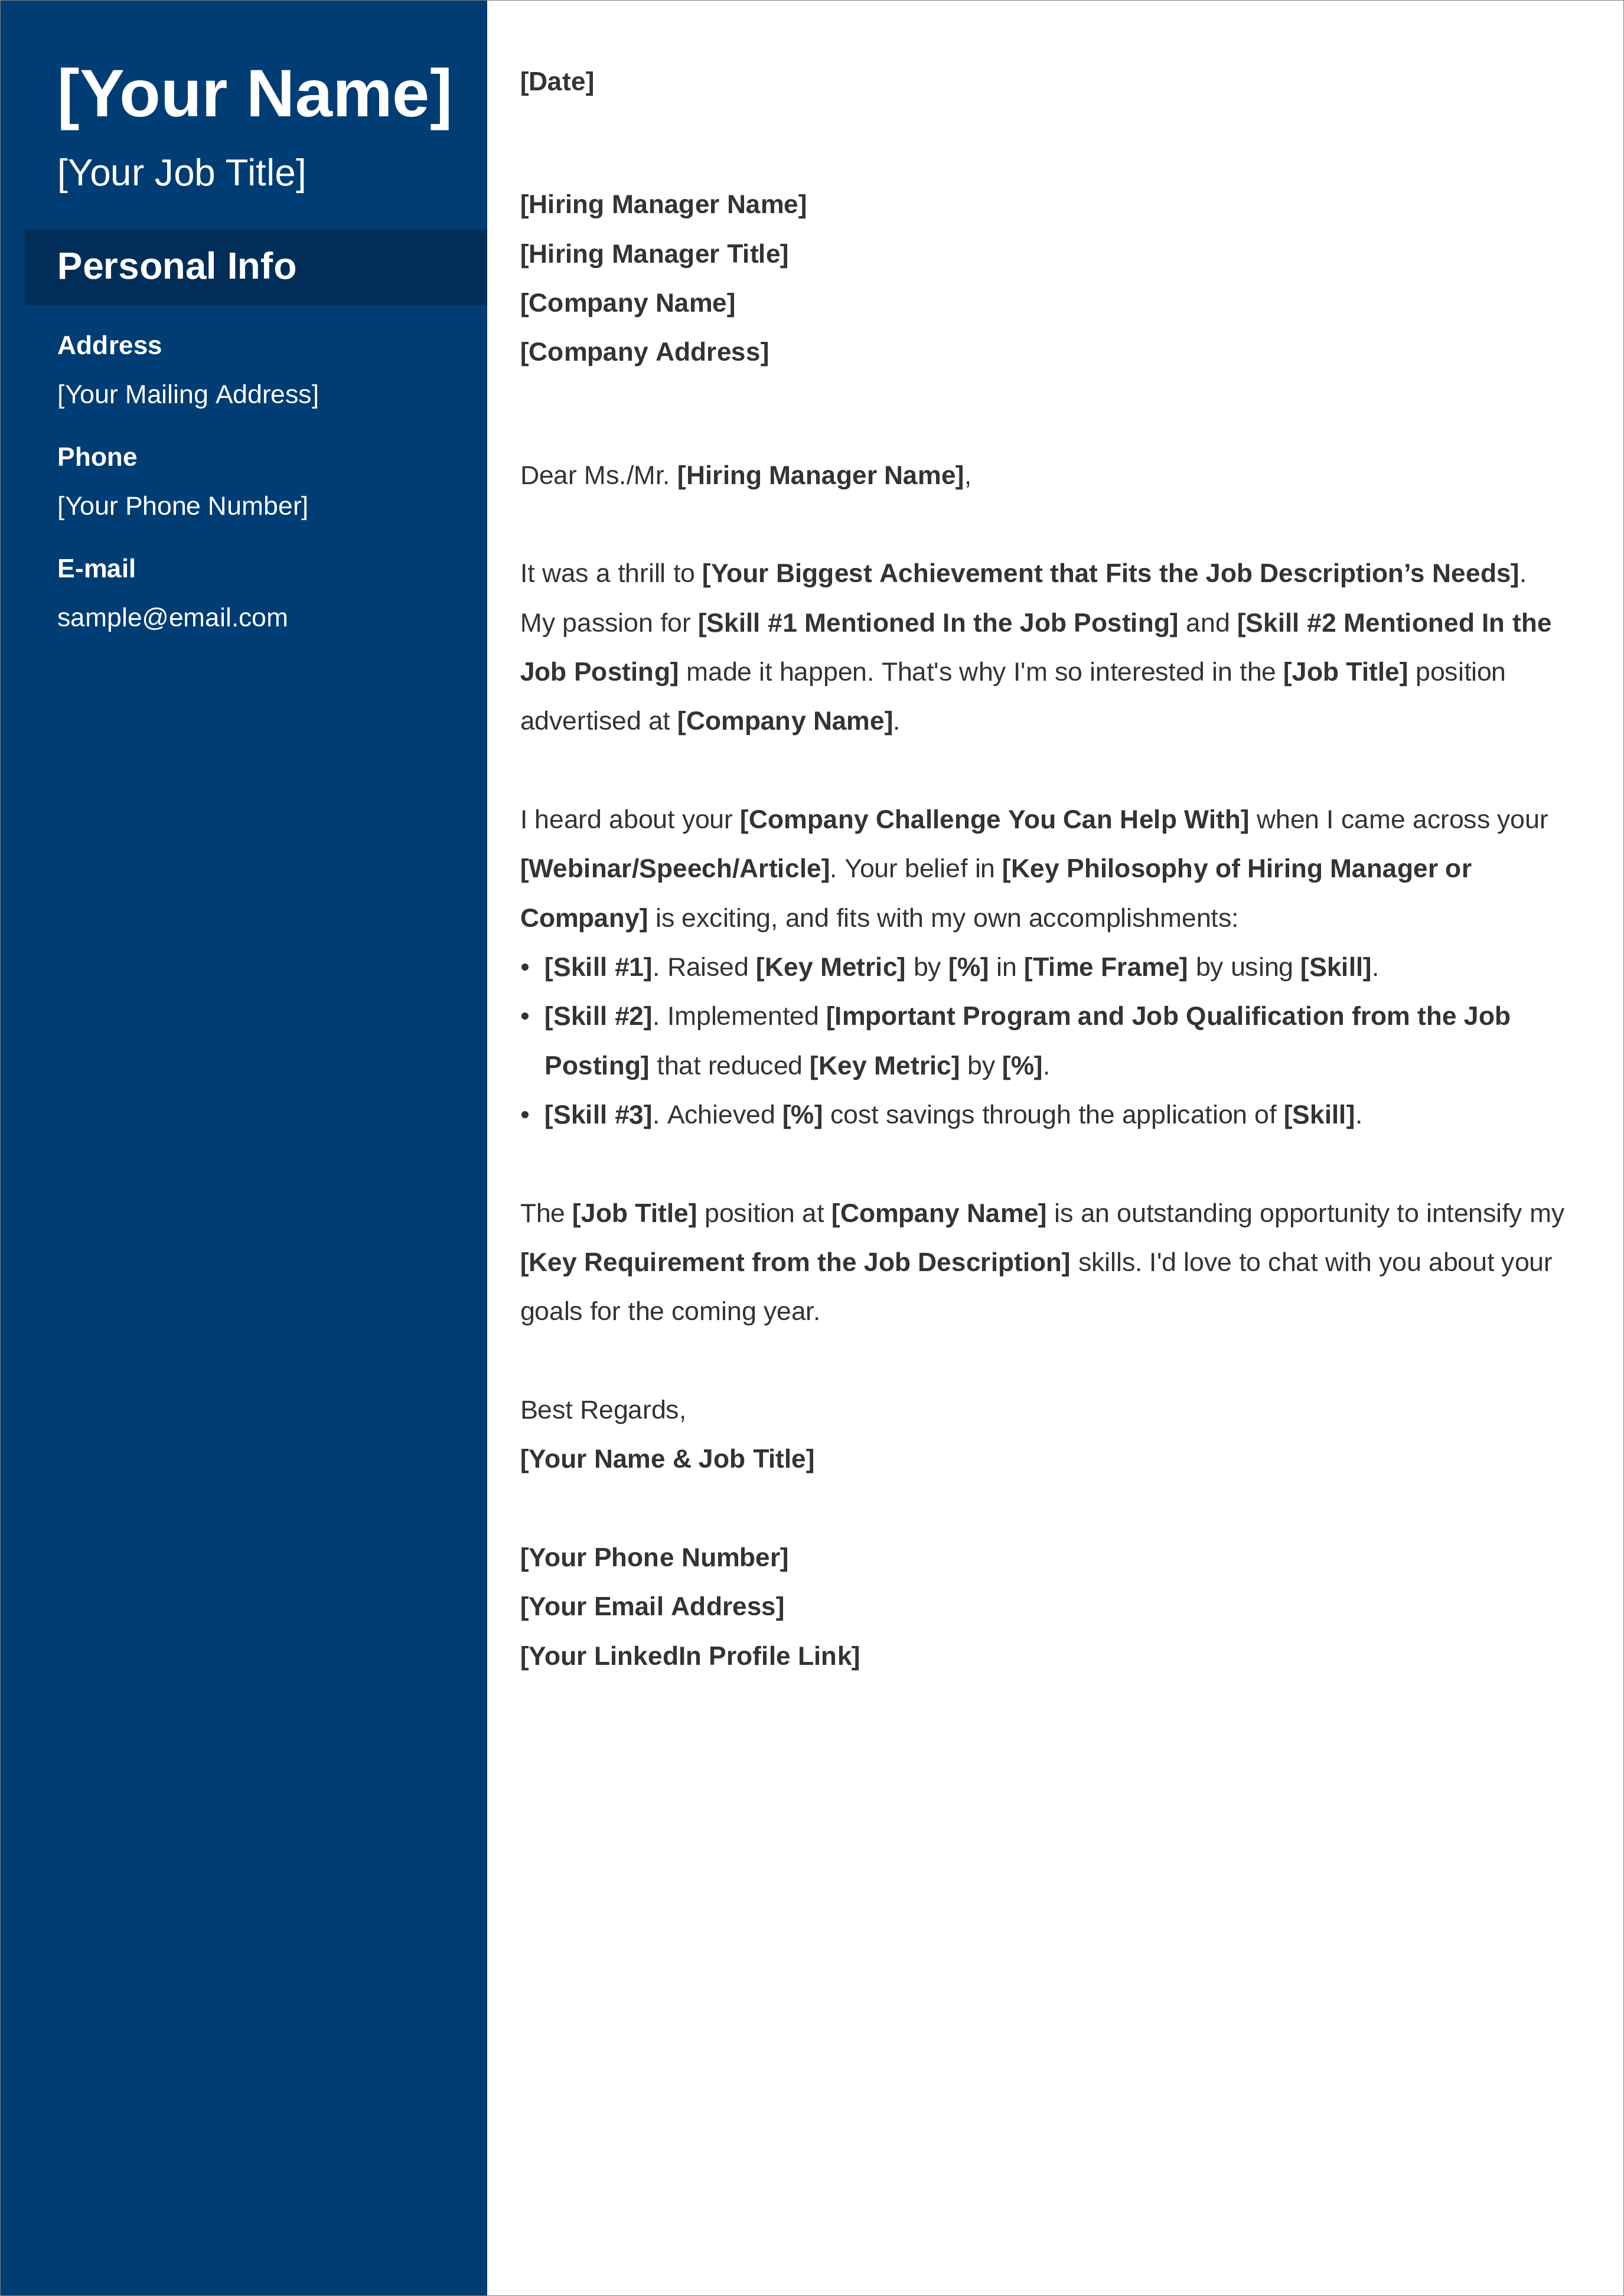 General Cover Letter That's Not Generic: 3 All-Purpose Samples